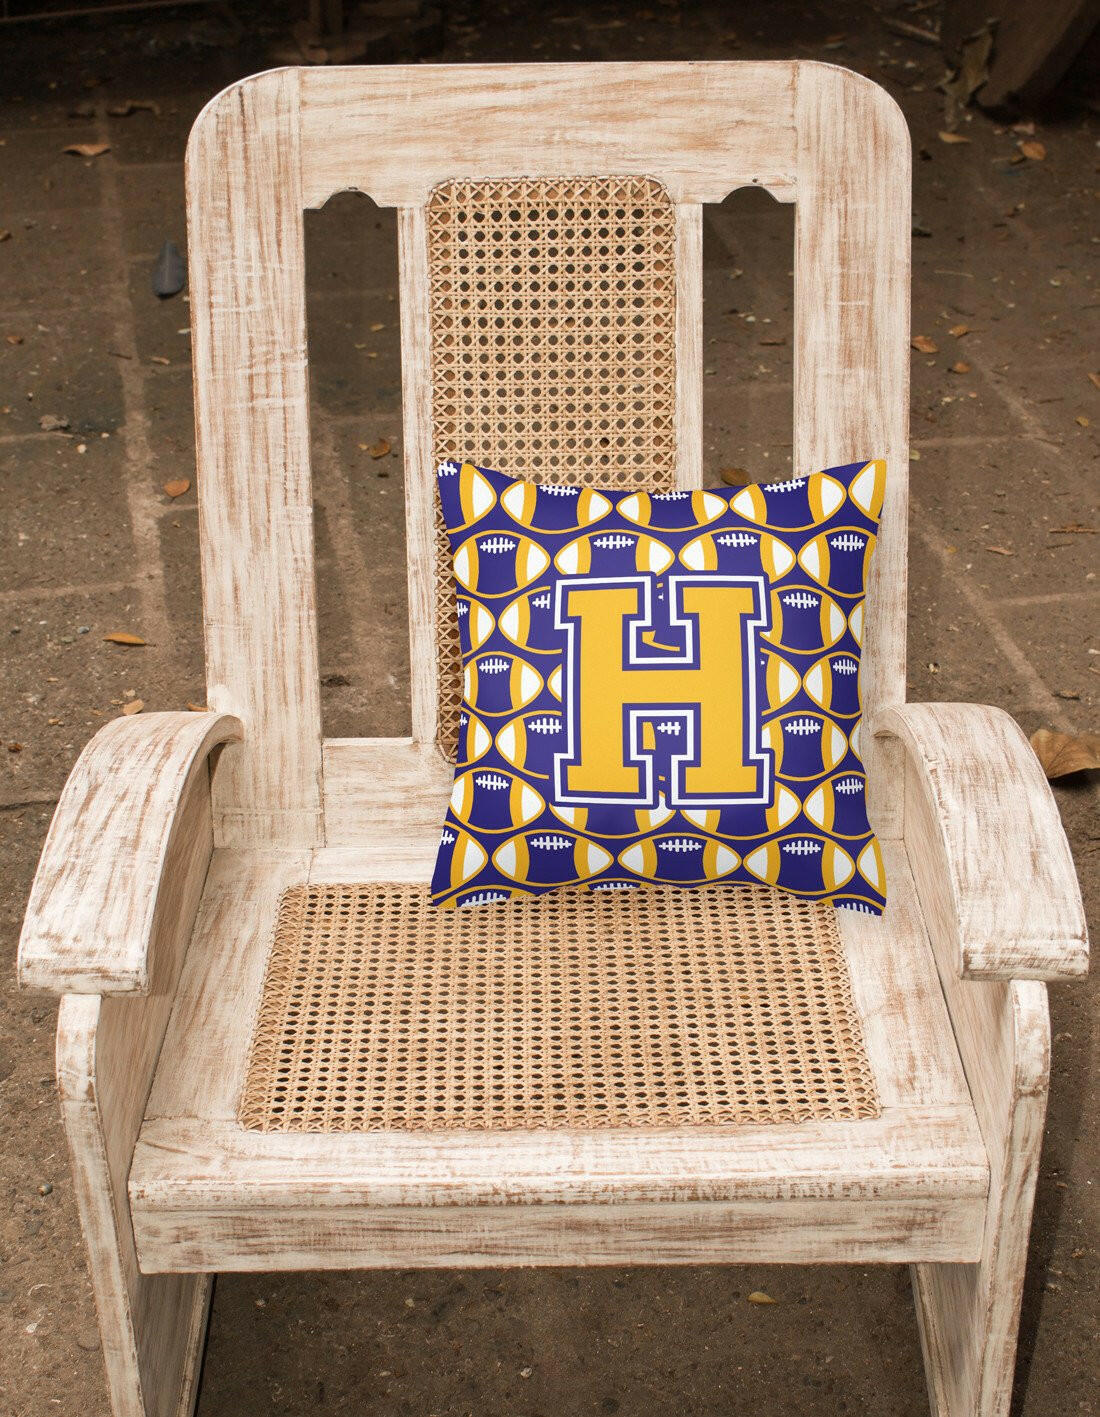 Letter H Football Purple and Gold Fabric Decorative Pillow CJ1064-HPW1414 by Caroline's Treasures